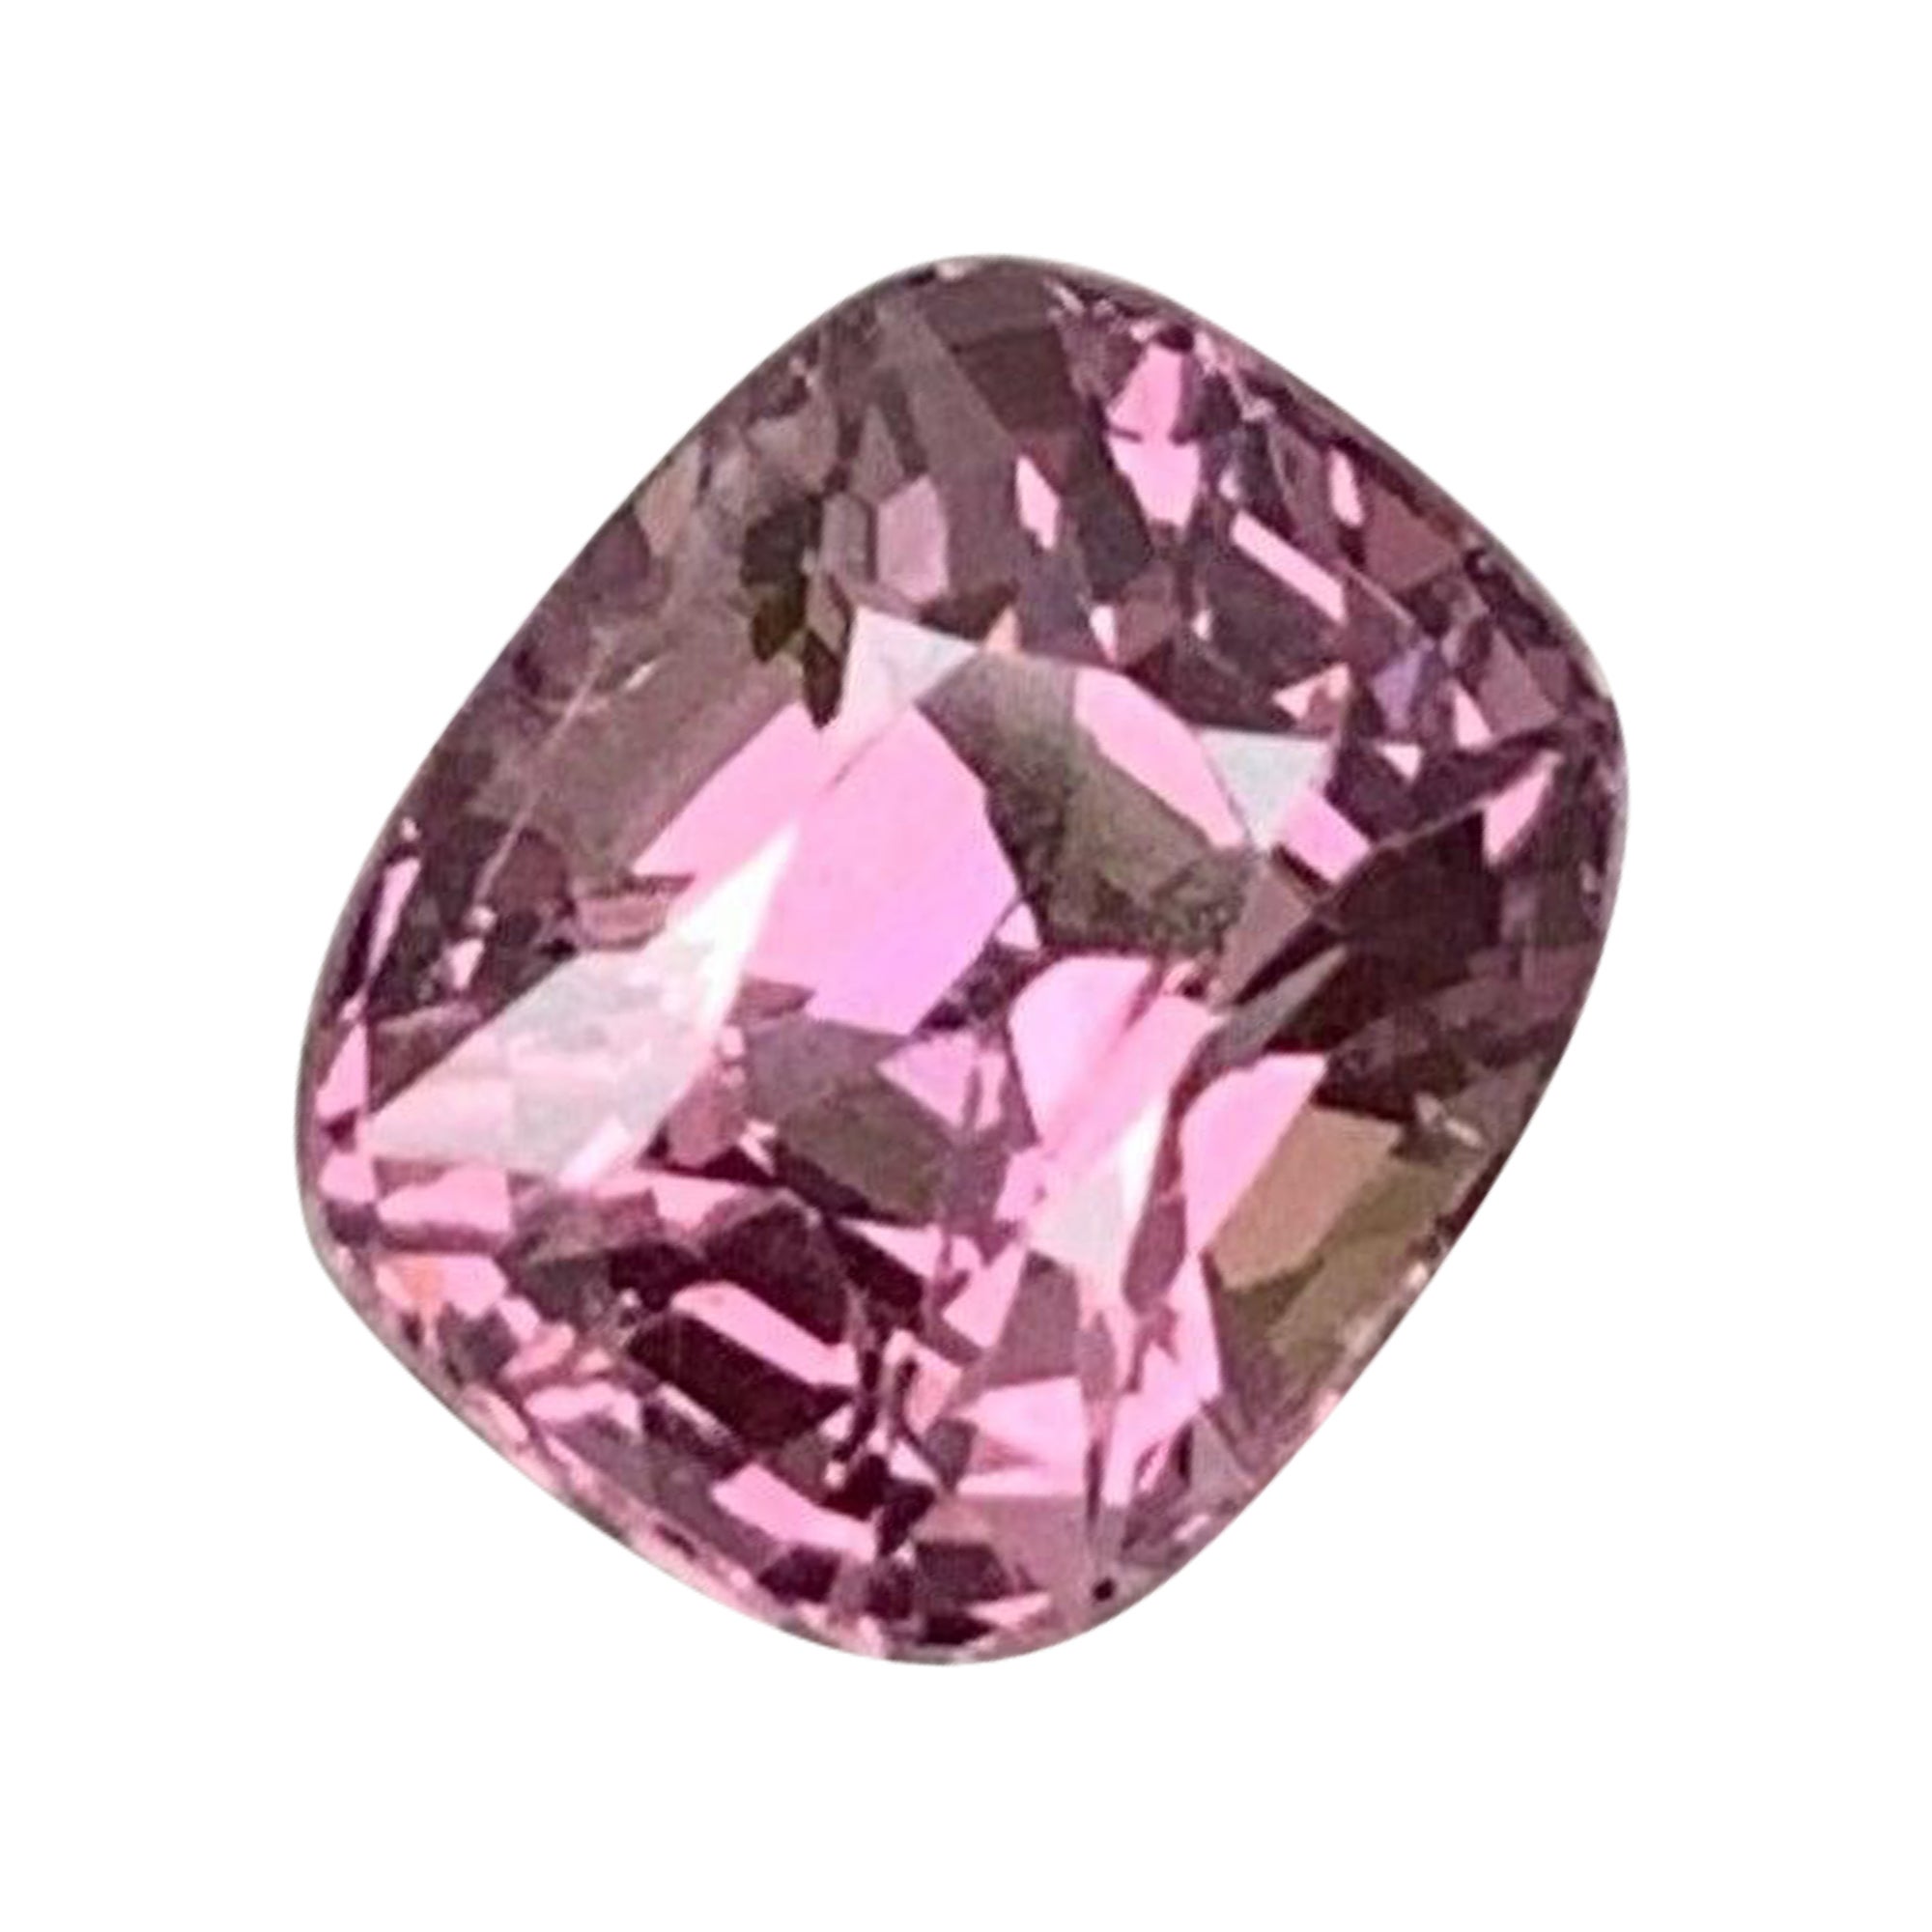 Brilliant Cut Natural Spinel Gemstone 1.25 Carats Loose Spinel For Jewelry Use For Sale